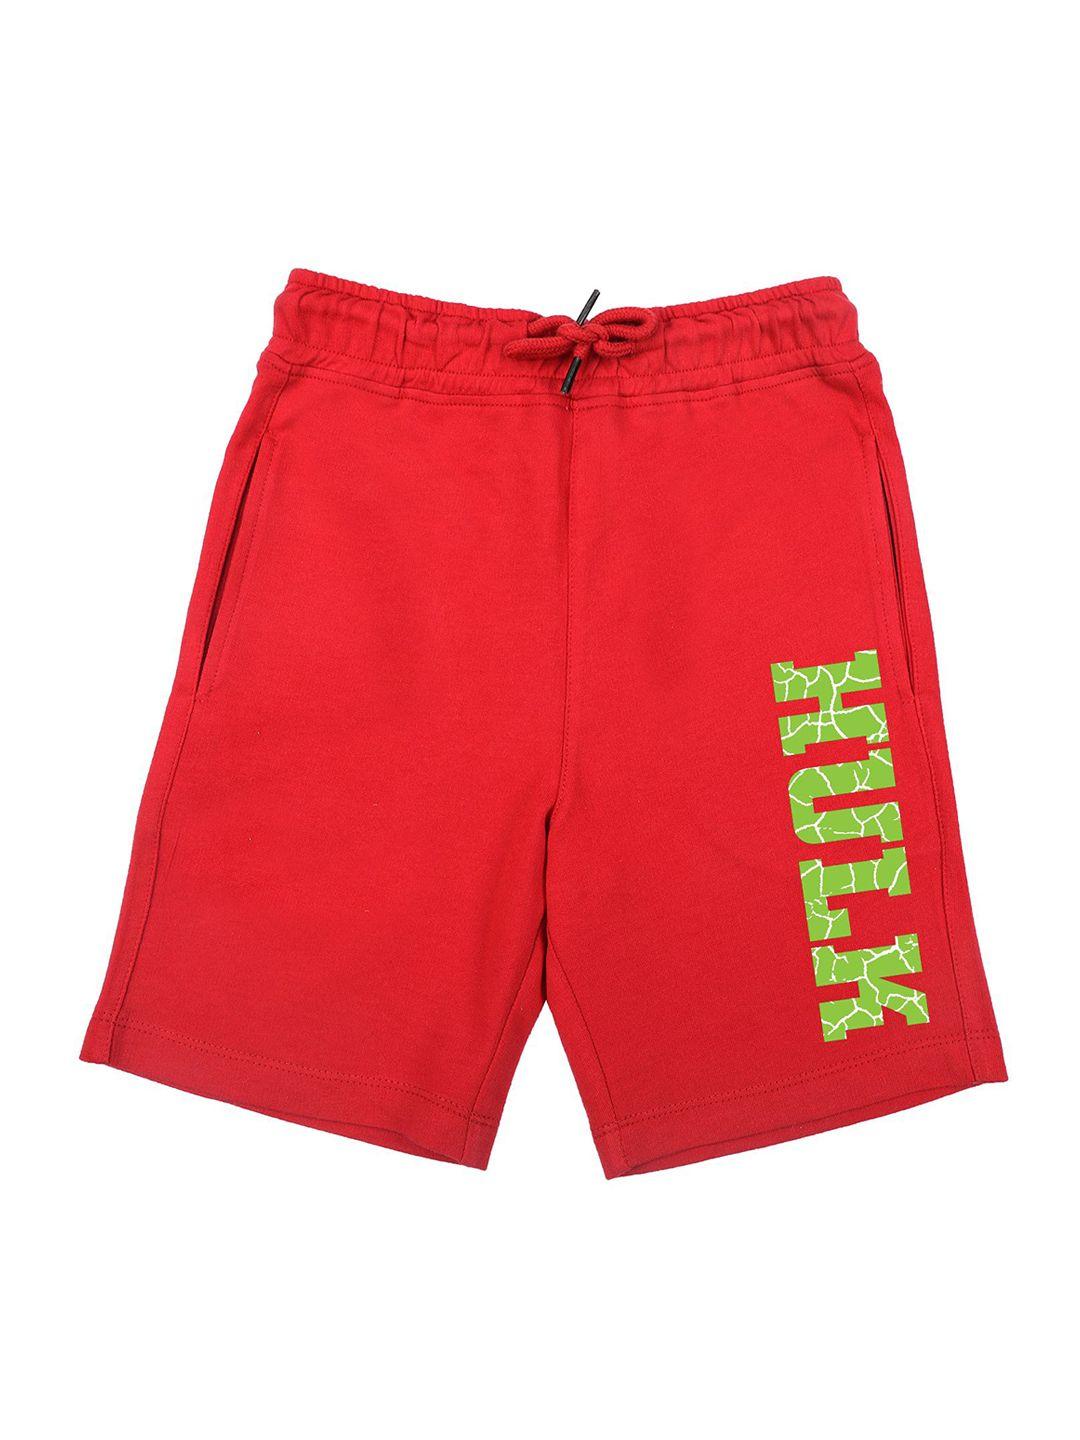 marvel by wear your mind boys red superhero printed hulk shorts